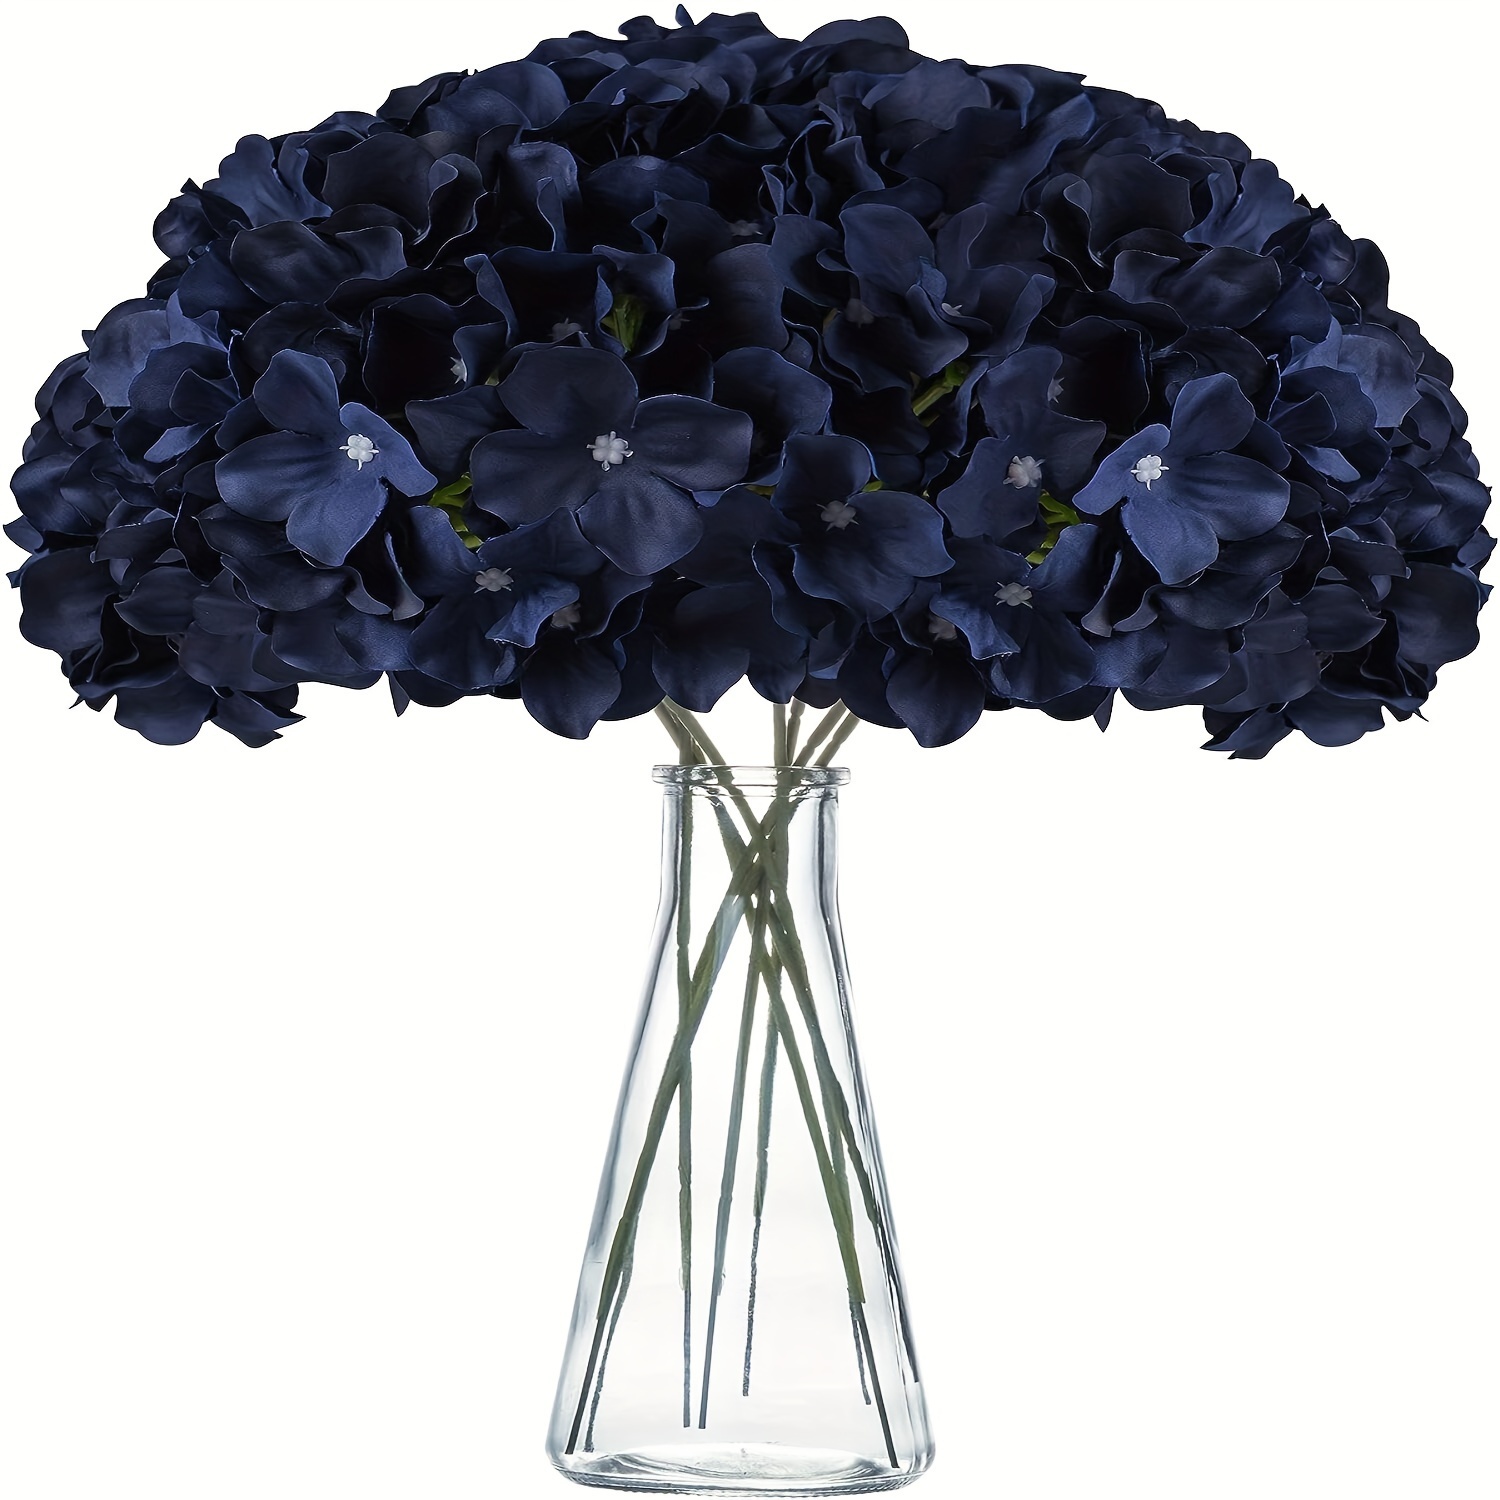 

6pcs Hydrangea Silk Flowers With Stems Artificial Hydrangea Flowers Navy Blue For Wedding Home Party Decor